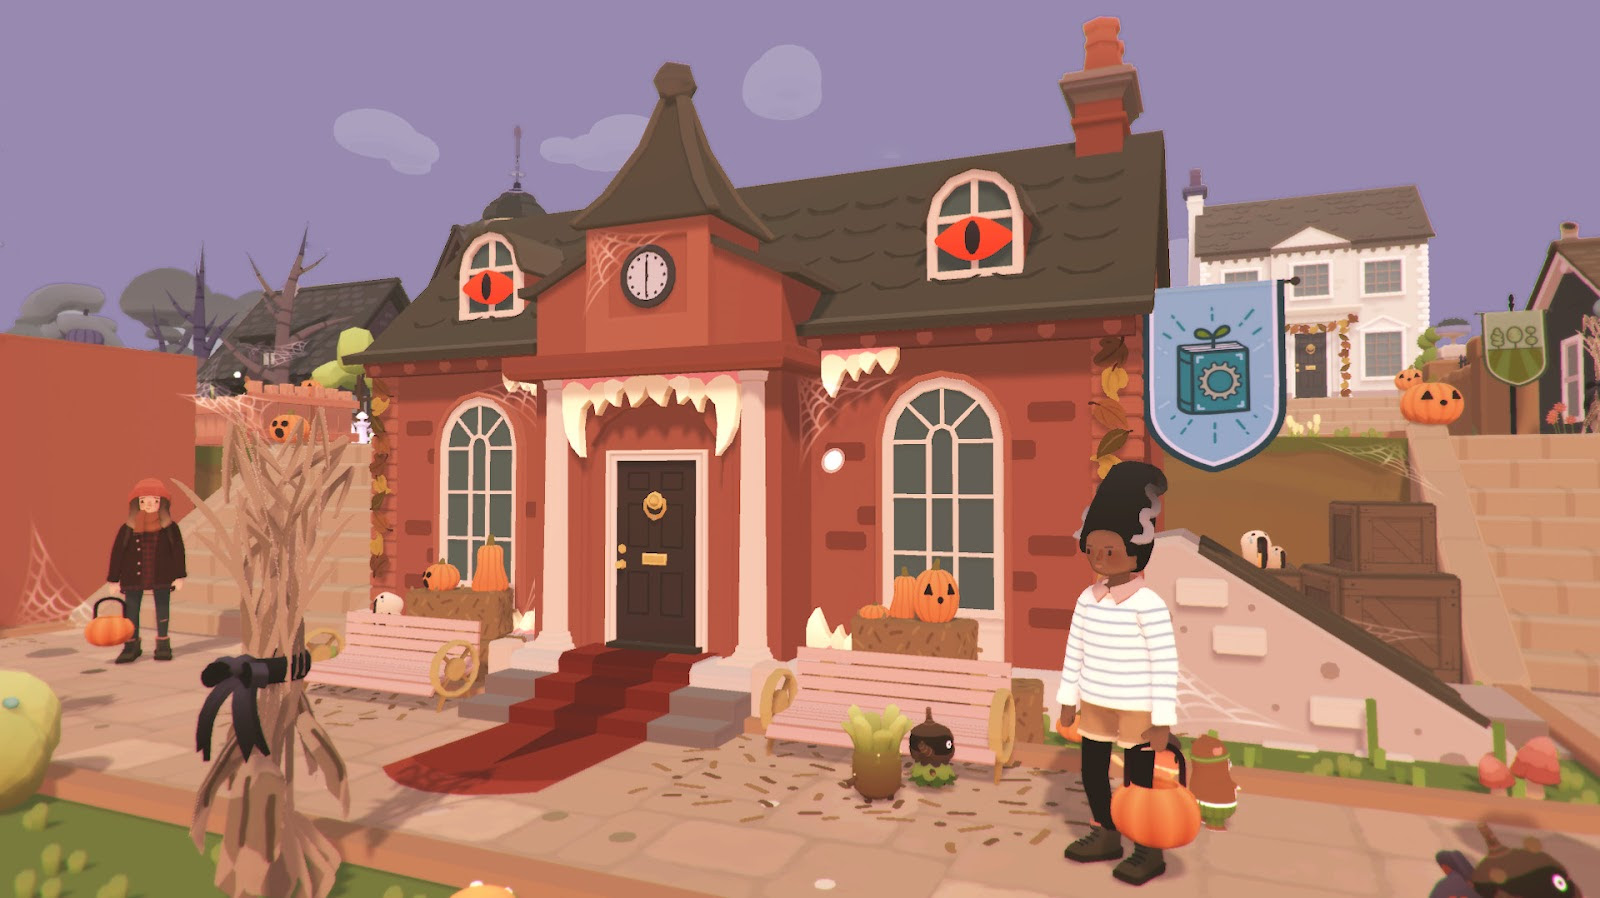 A screenshot from Ooblets' Halloween event. The town hall is adorned with spooky decorations, and two townsfolk are in costume.